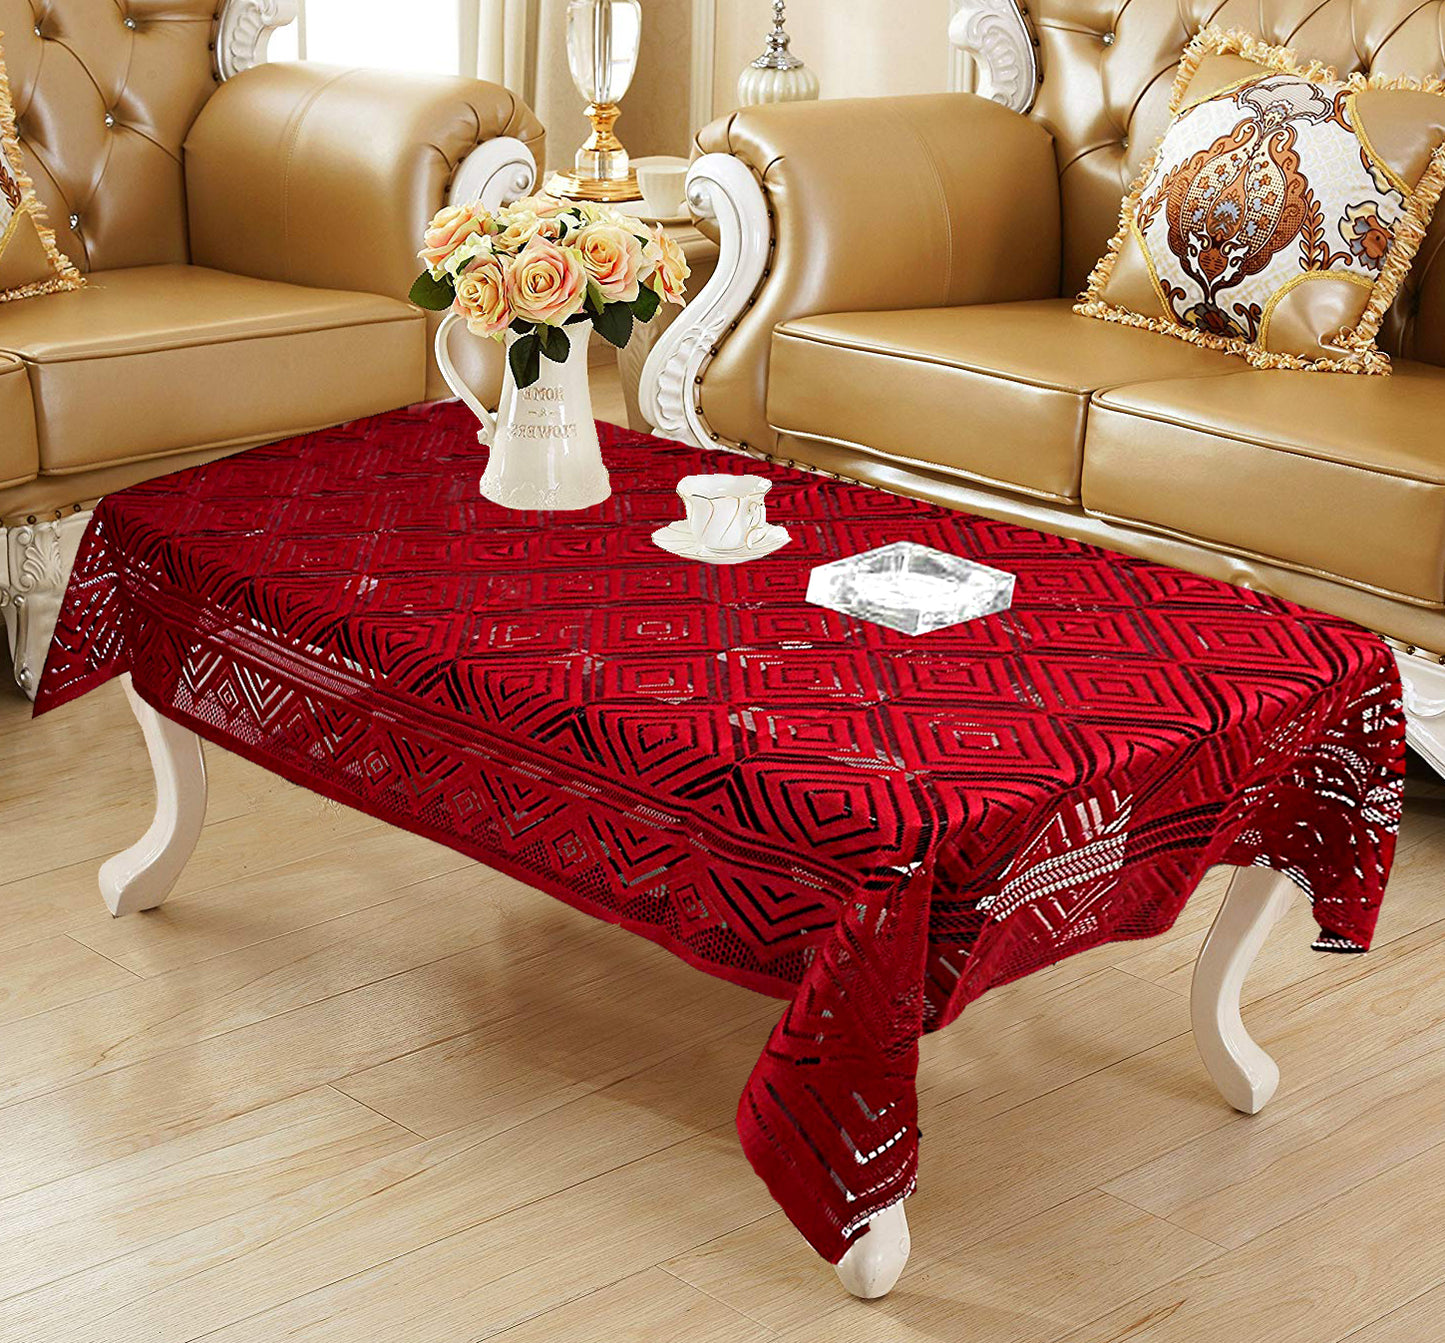 Weavers Villa Cotton Net 4 Seater Center Table Cover (40 X 60 Inches)